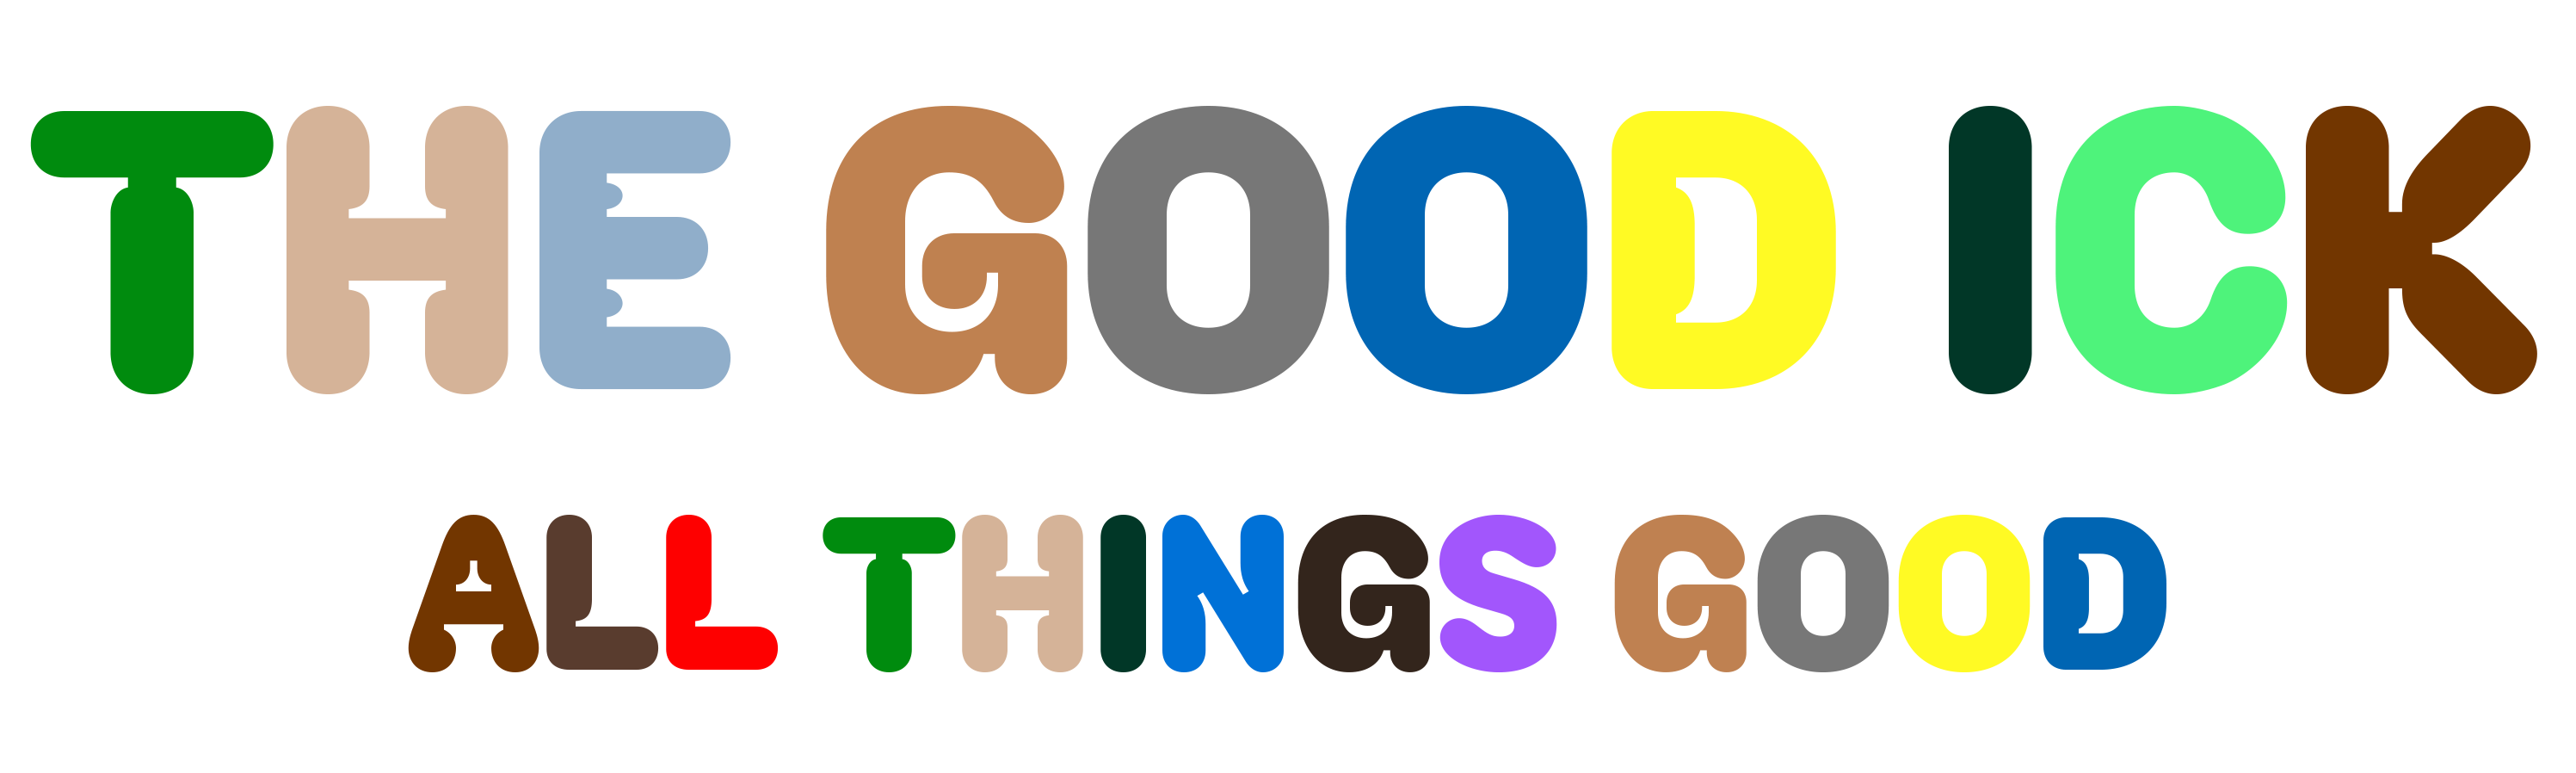 The Good Ick - All Things Good